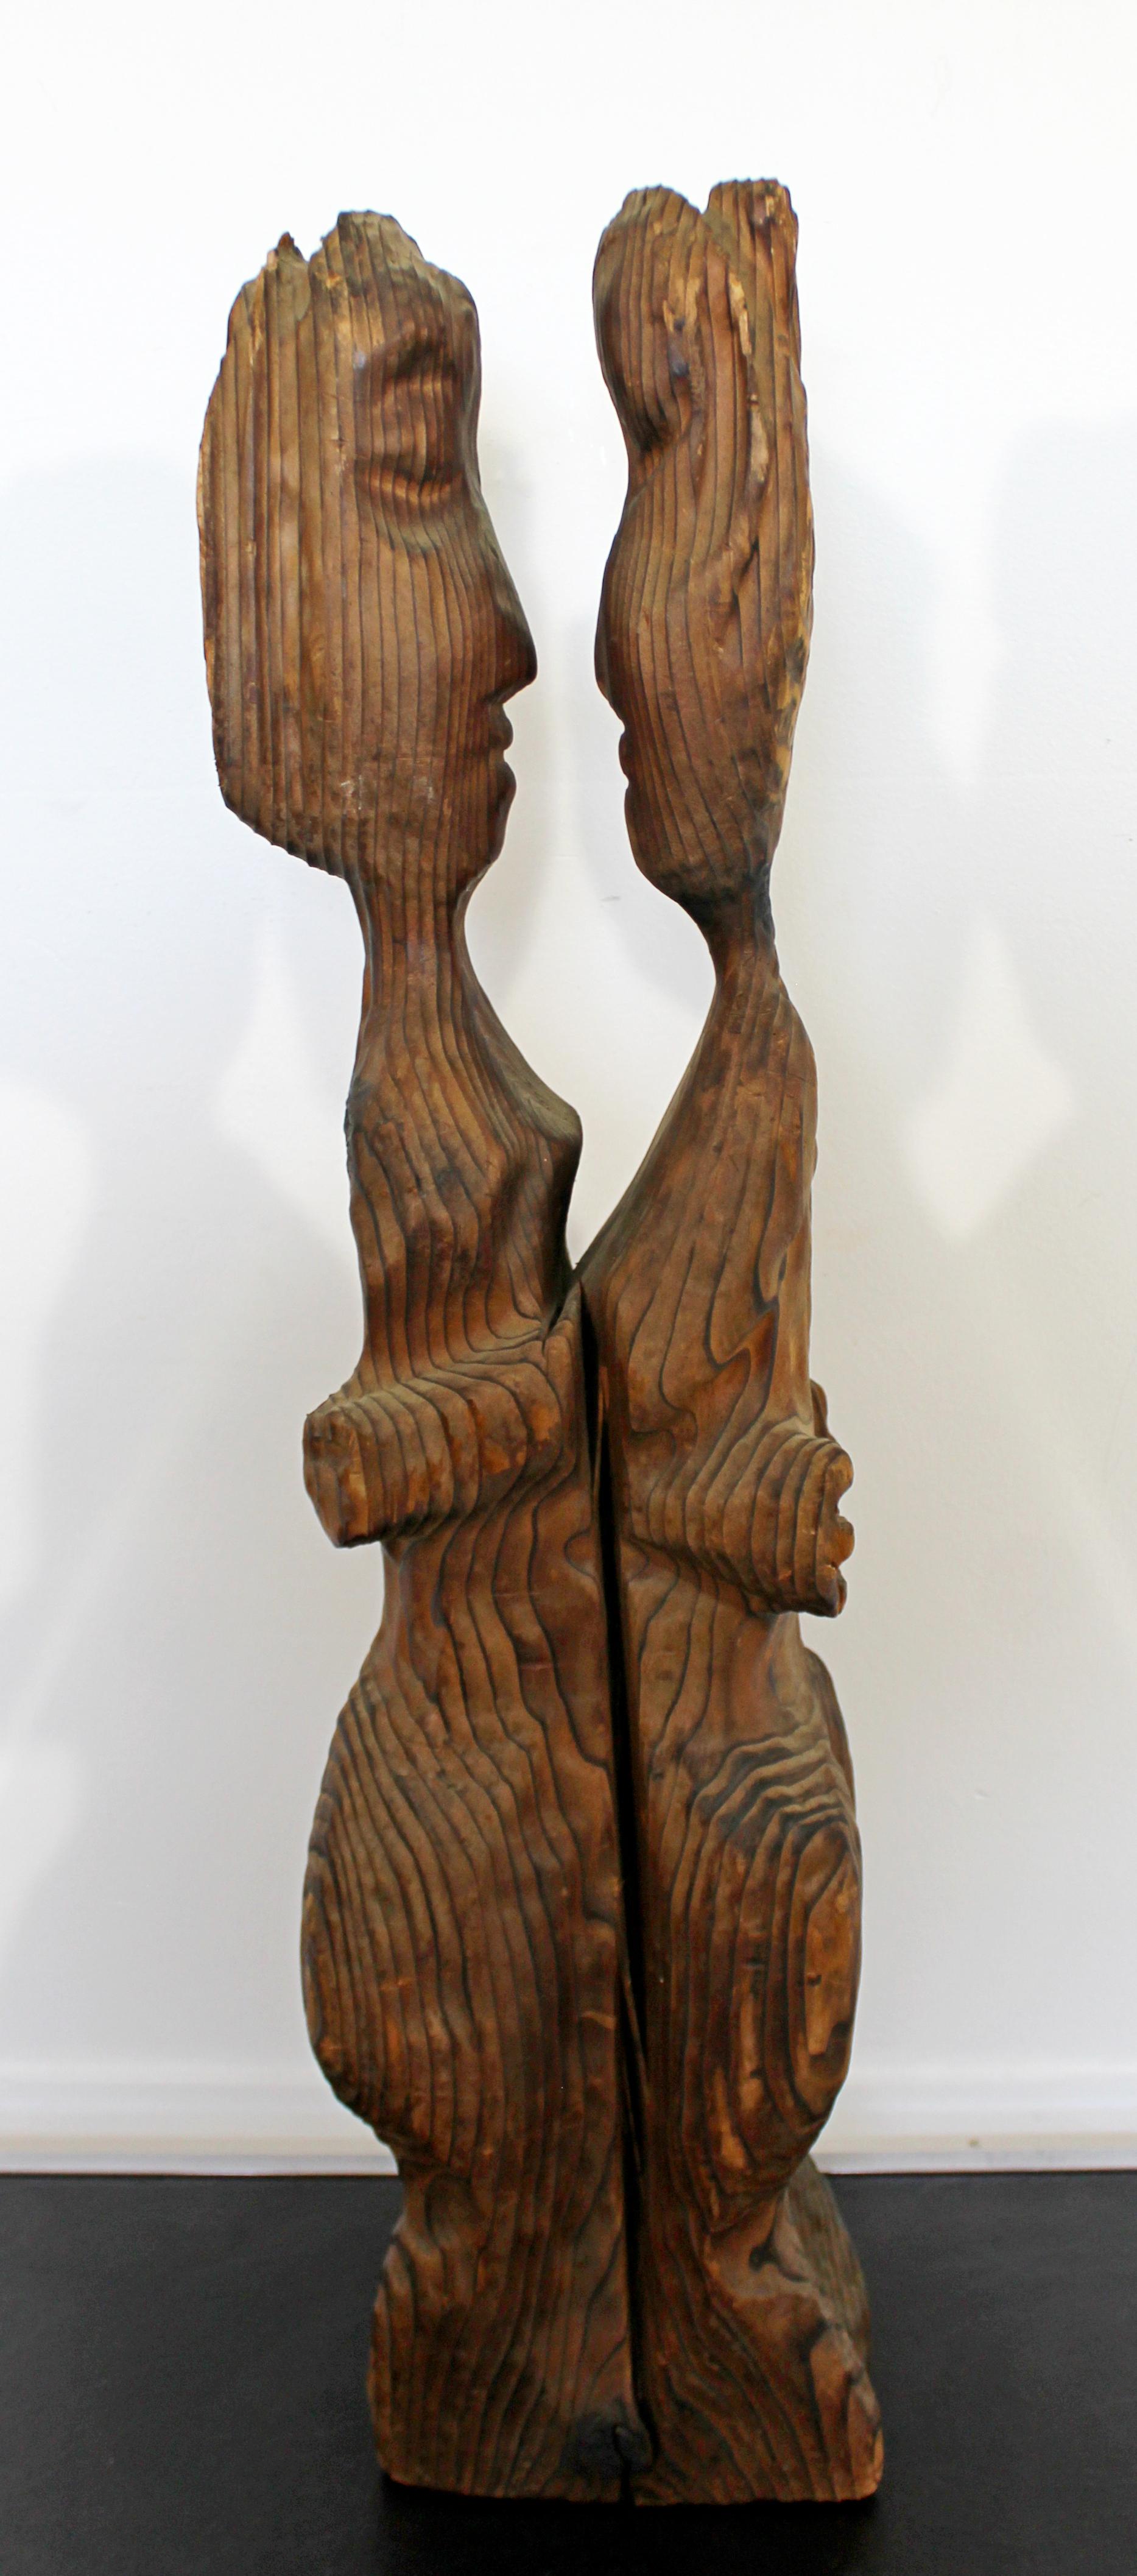 20th Century Mid-Century Modern Torched Wood Figurative Art Table Sculpture